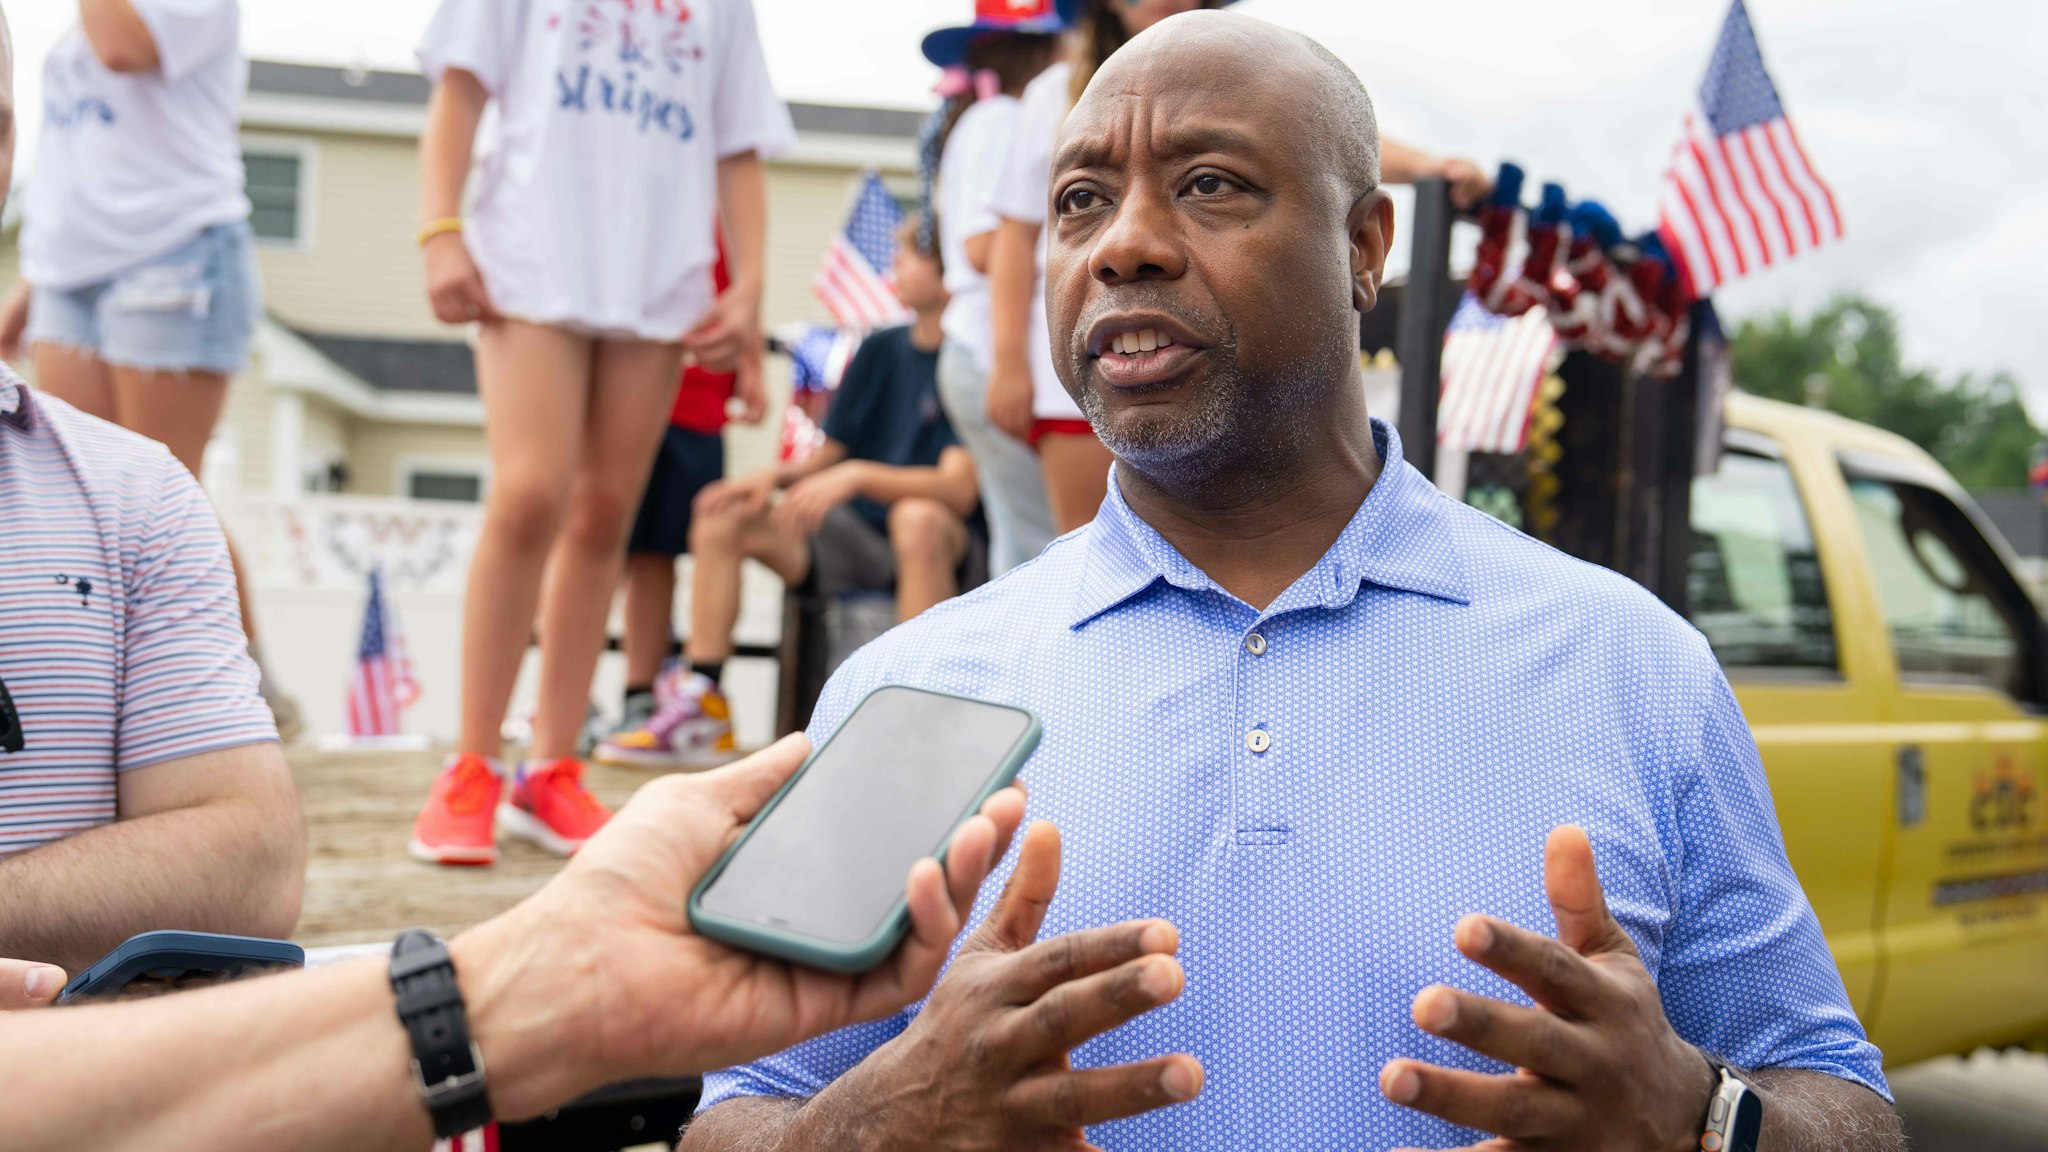 Senator Tim Scott, a Republican from South Carolina, attends the Independence Day parade in Merrimack, New Hampshire, US, on Tuesday, July 4, 2023. Republican presidential candidates face an early test this month of whether they can raise enough money to sustain their campaigns through party primaries and break away from a growing GOP field.